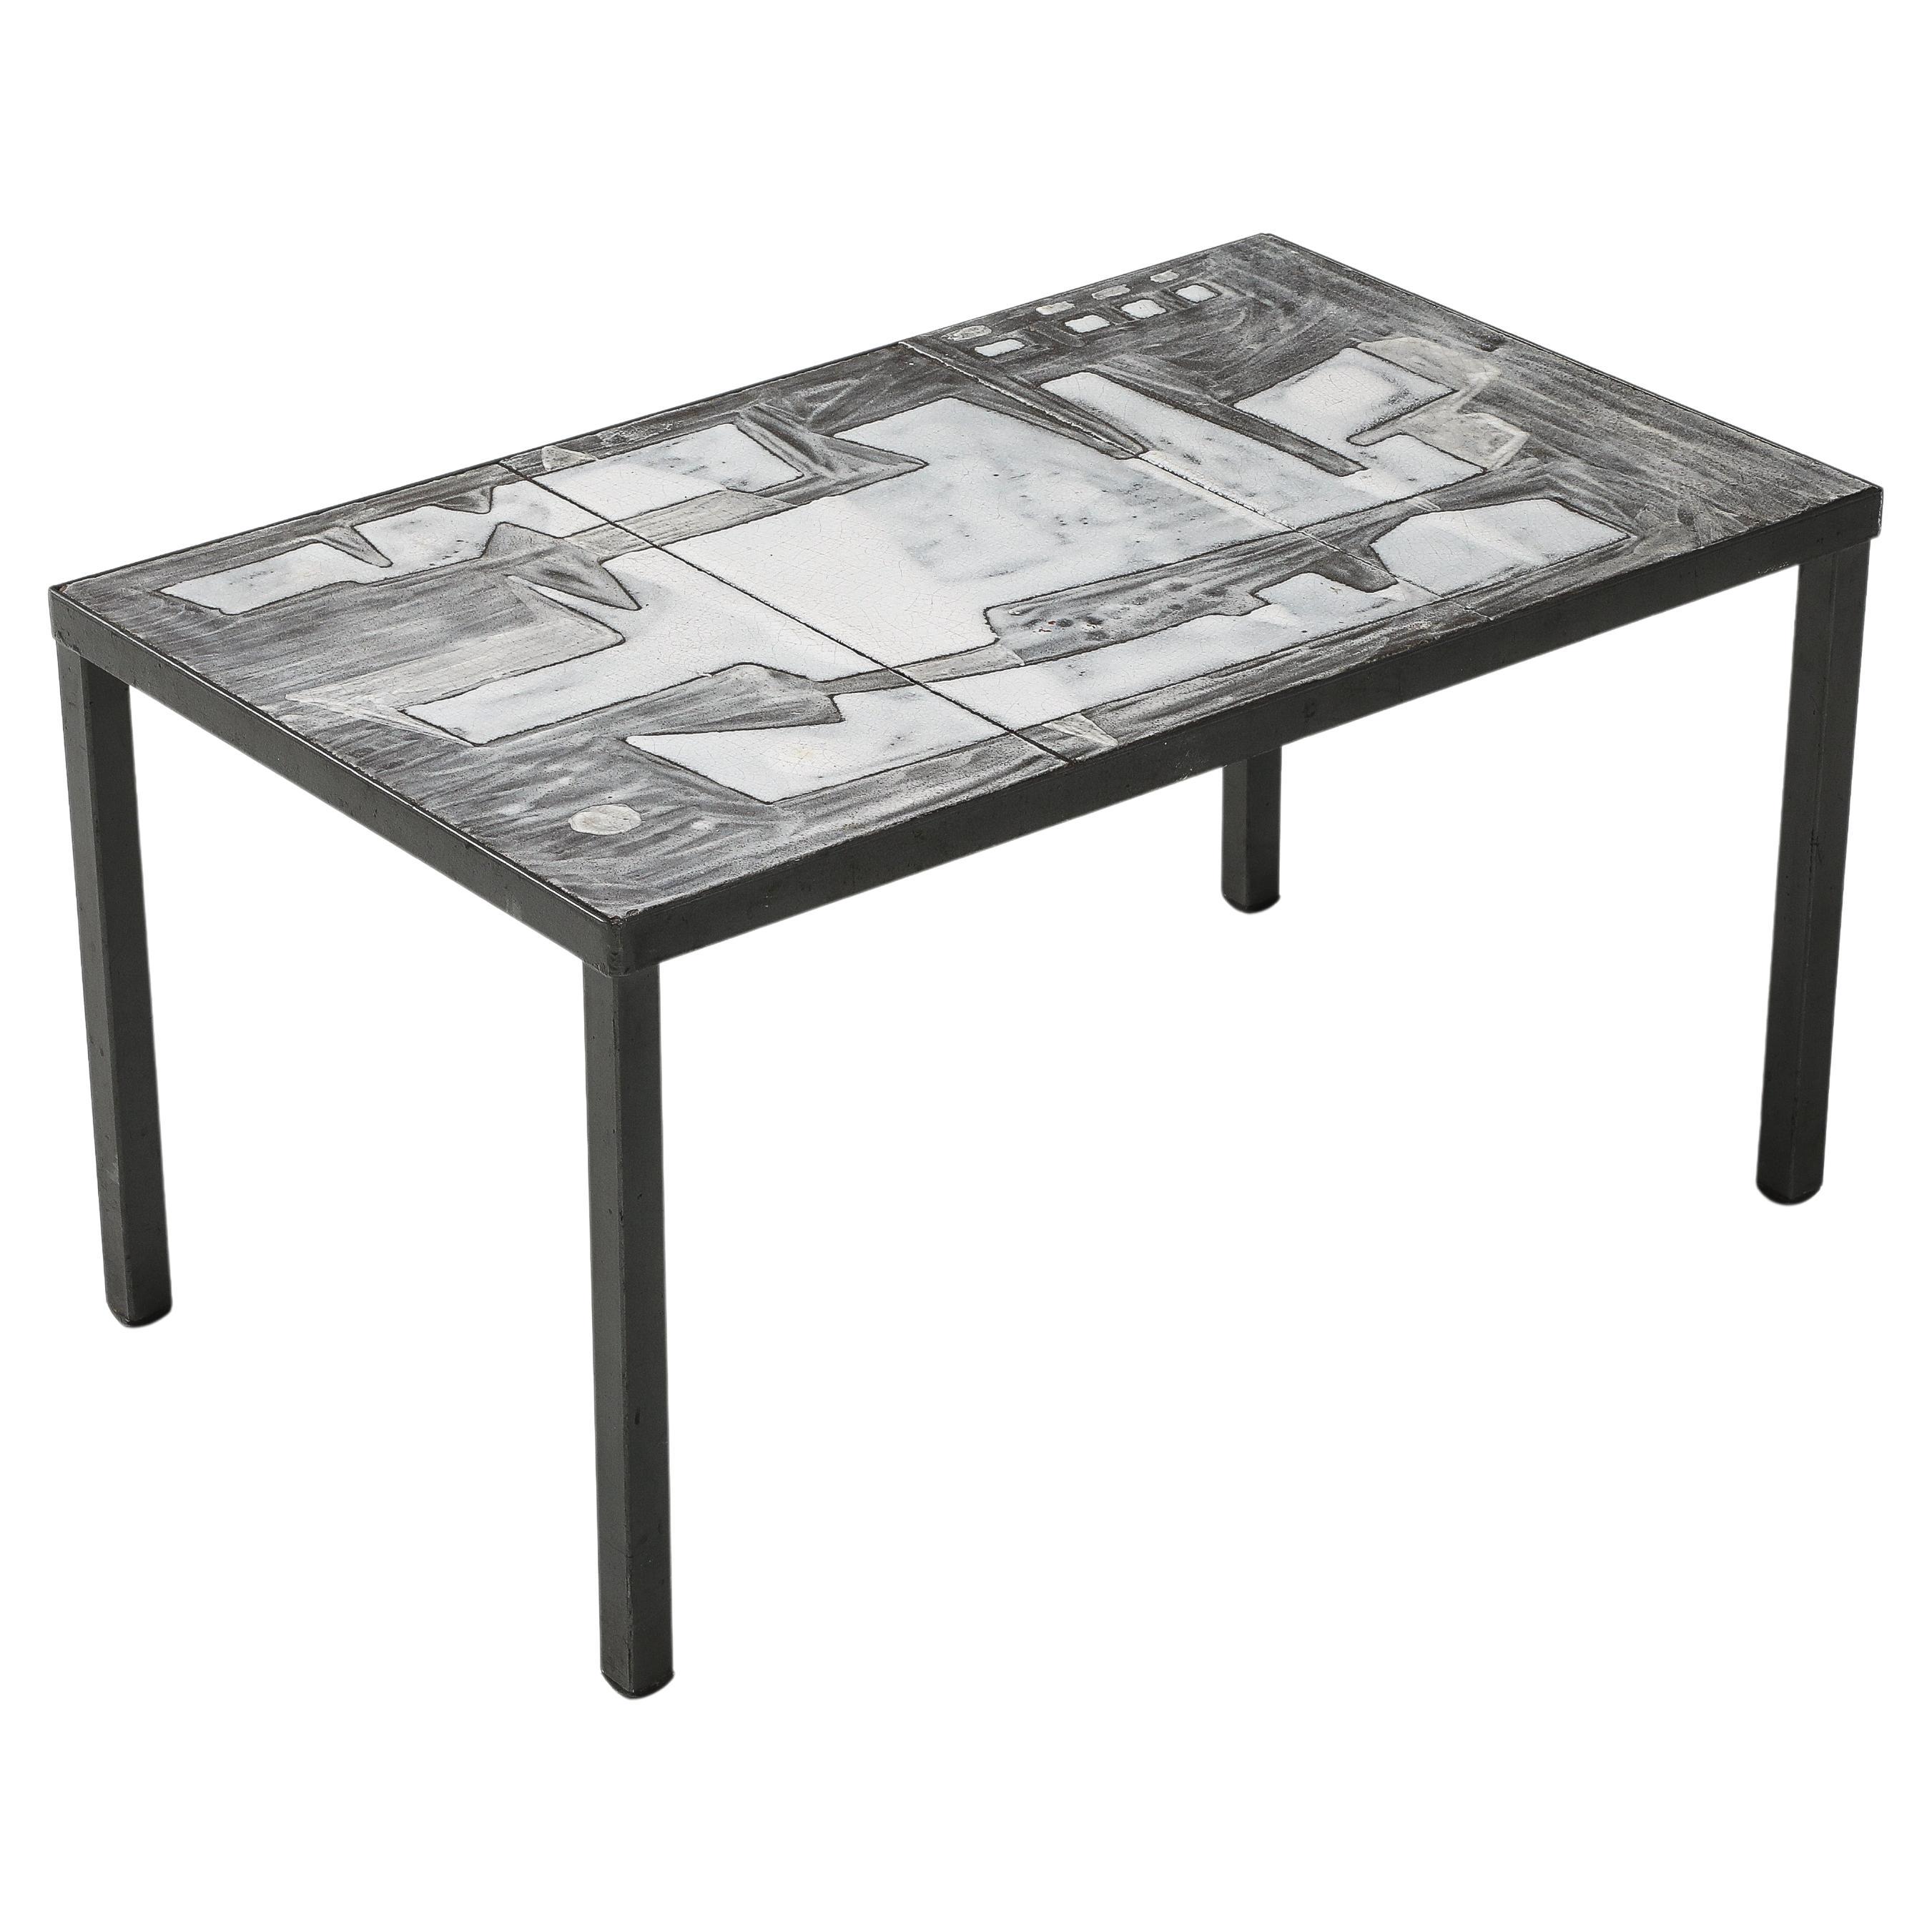 Cloutier Lava Stone Tile Top Coffee Table in White, Grey Abstract design, France For Sale